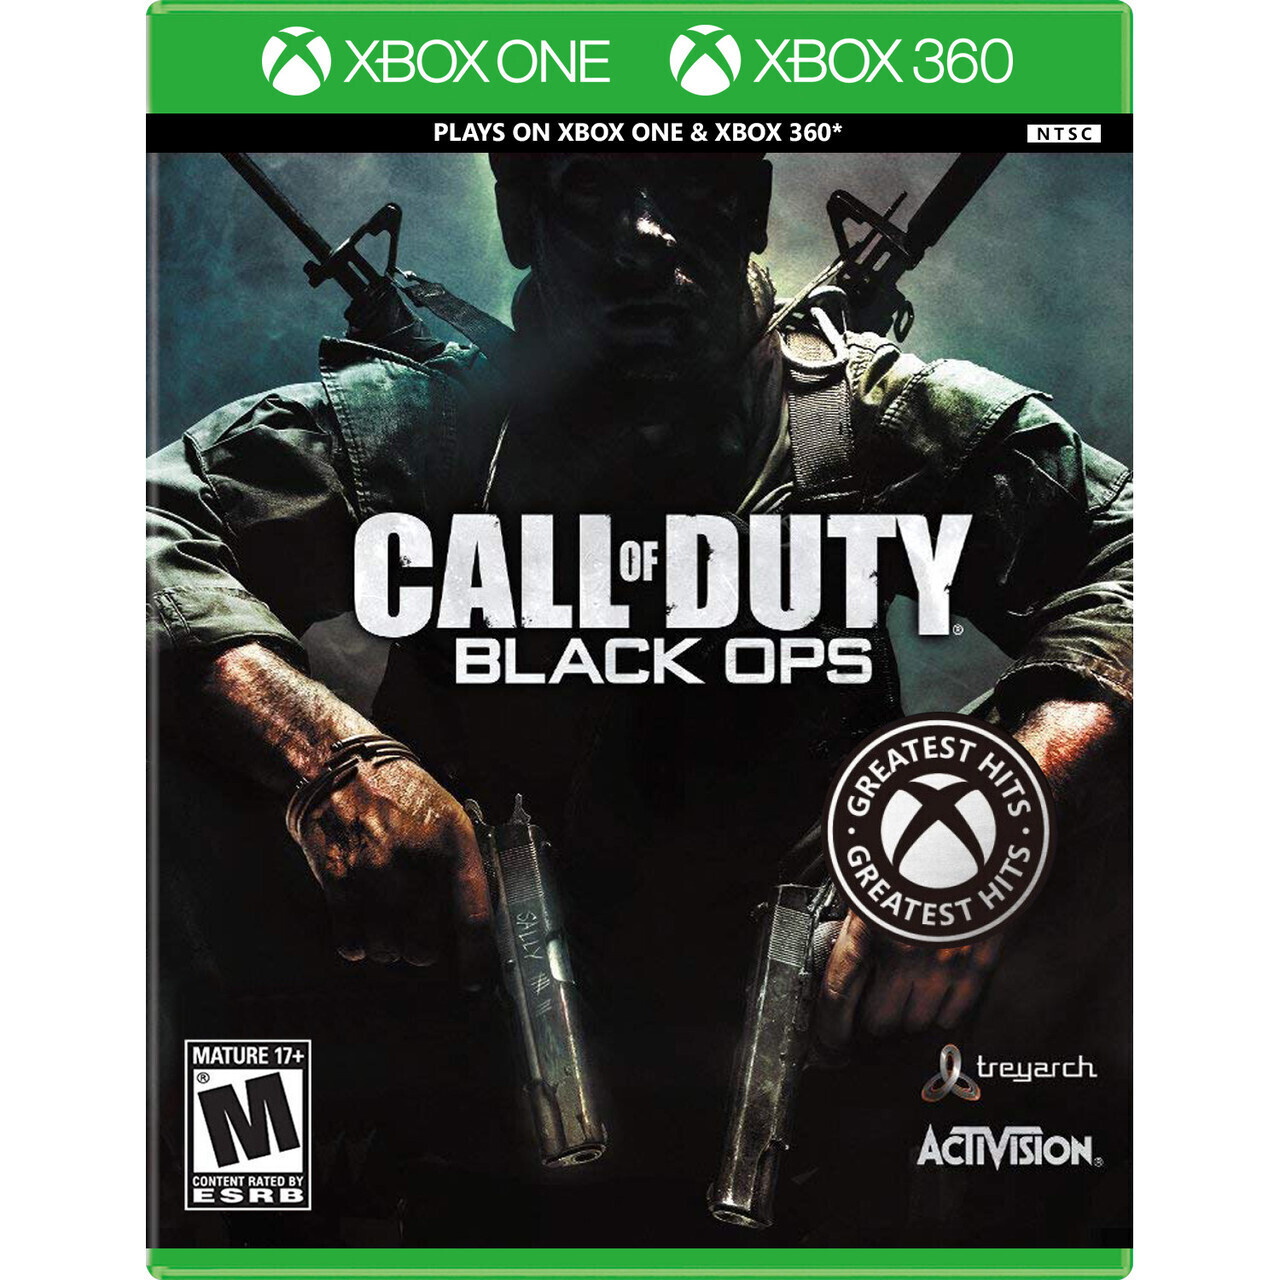 Call of duty xbox game. Black ops Xbox 360. Call of Duty диск на Xbox 360. Call of Duty Black ops диск Xbox 360. Call of Duty на иксбокс 360.